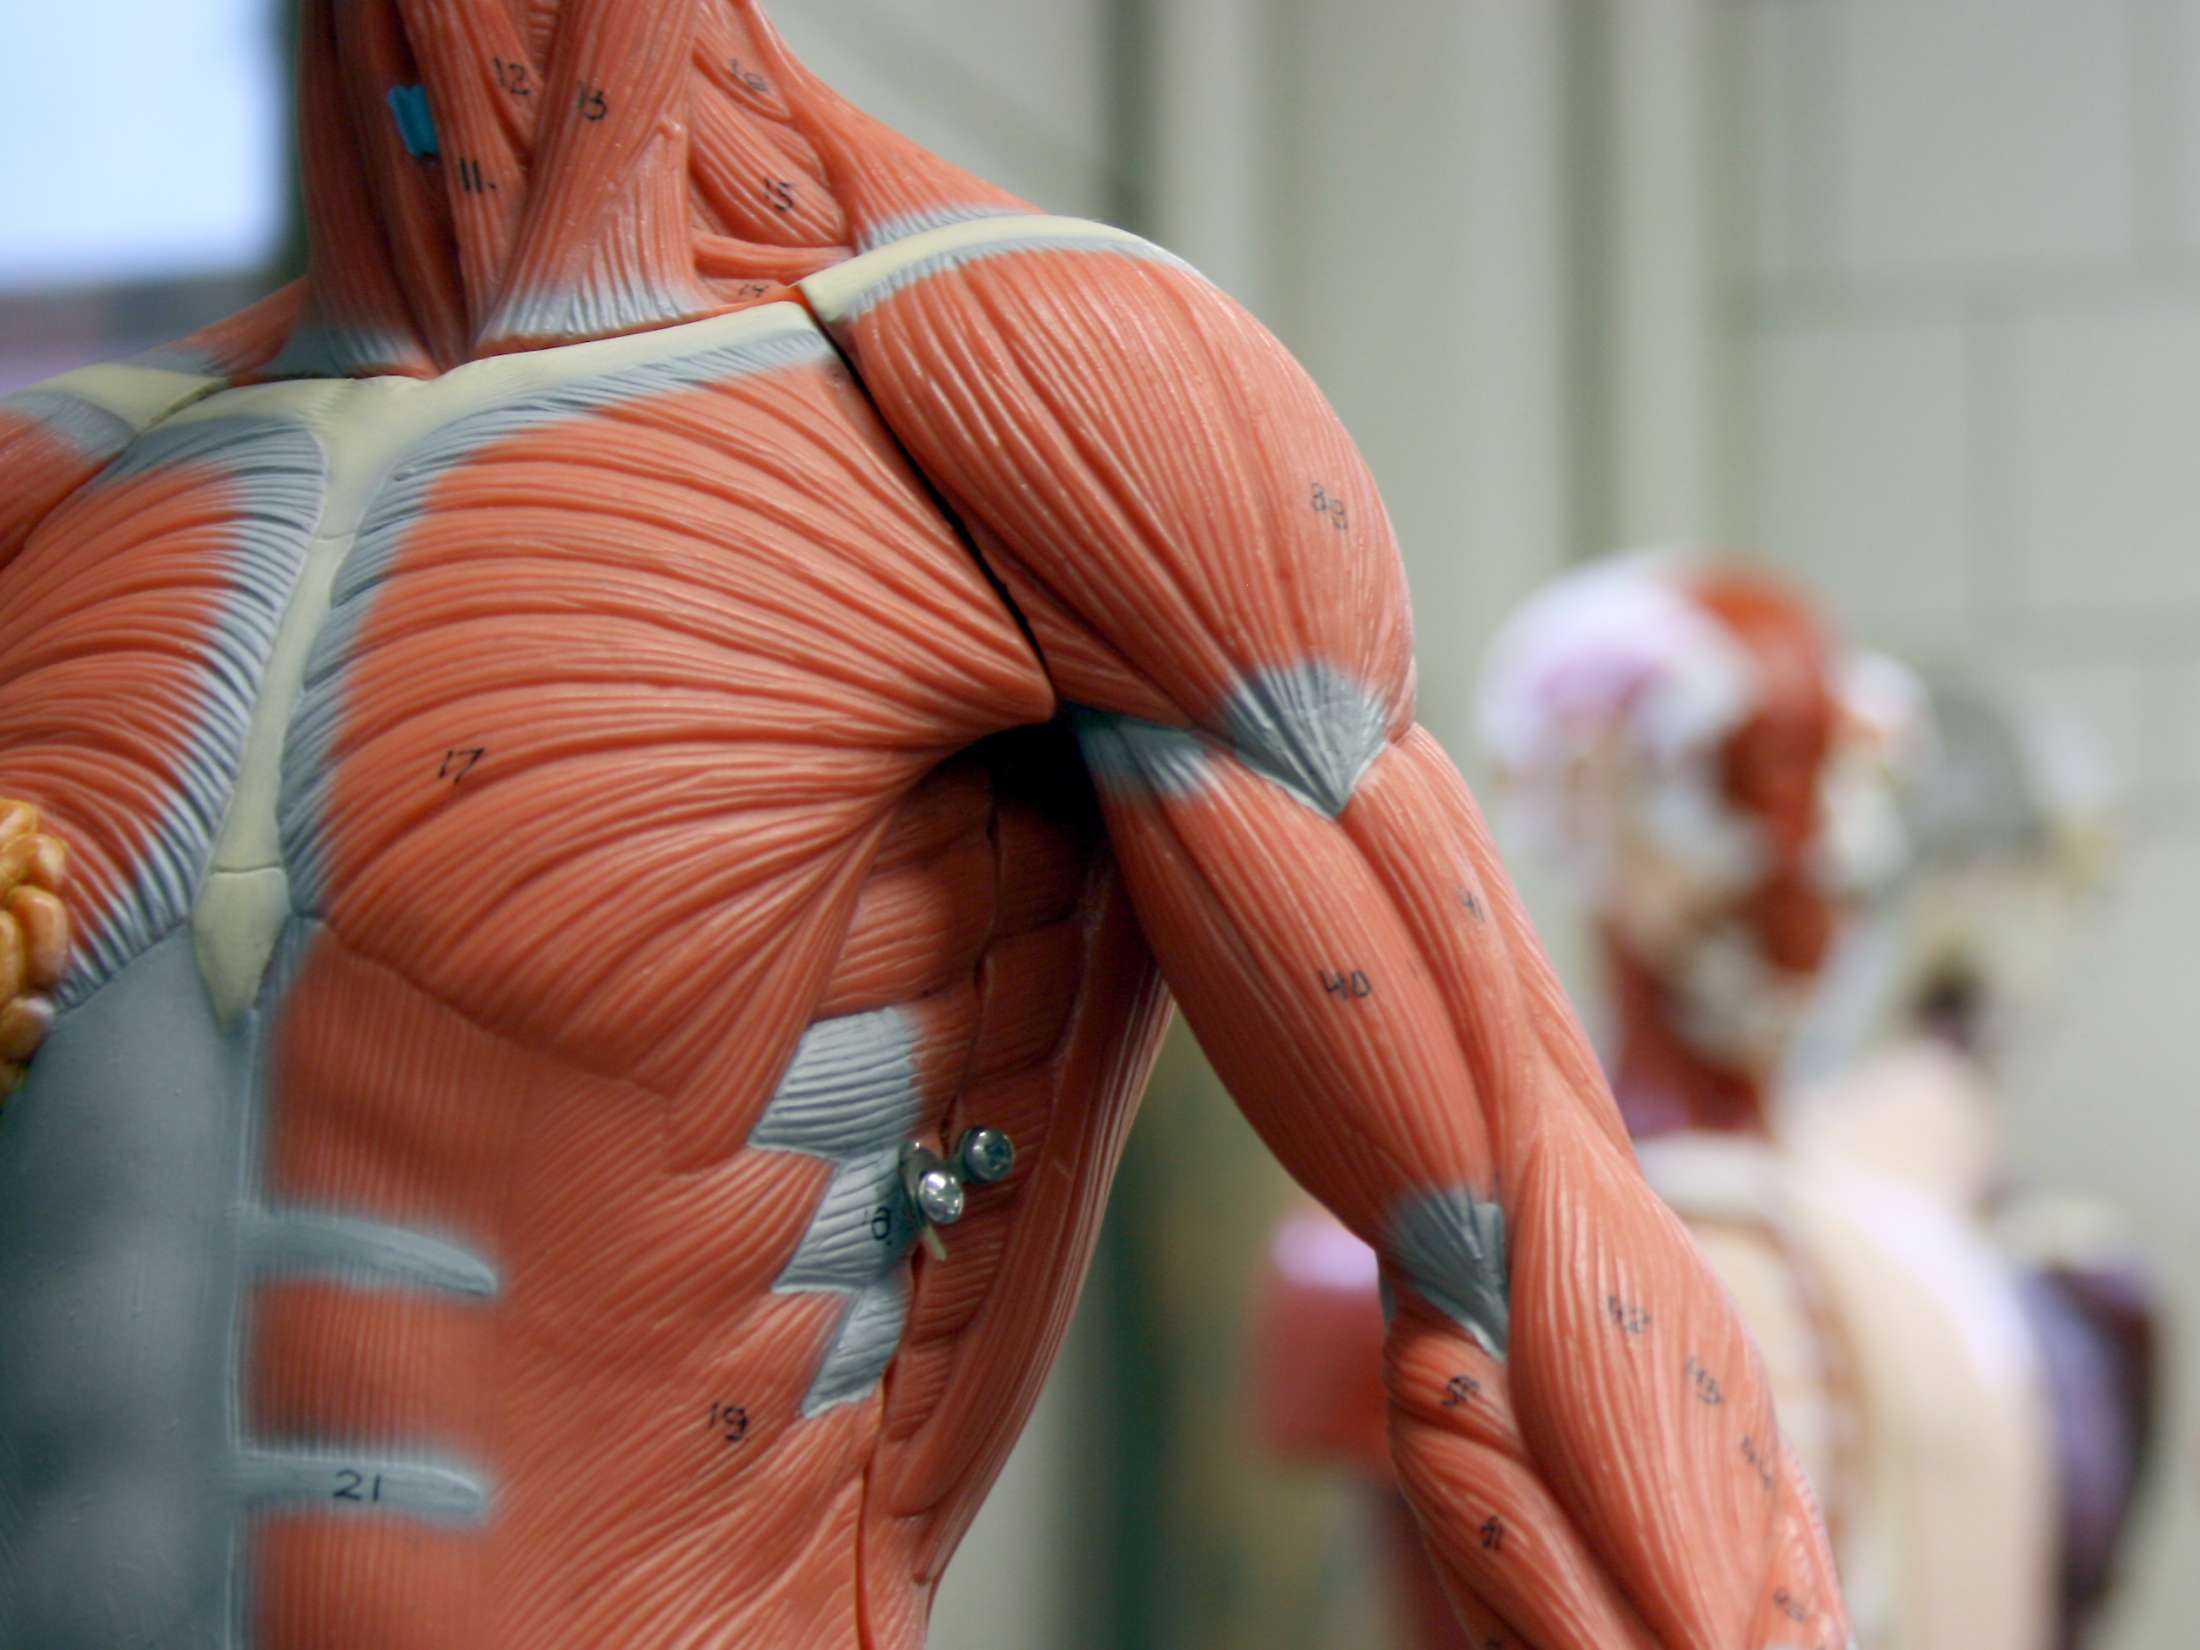 11 functions of the muscular system: Diagrams, facts, and structure